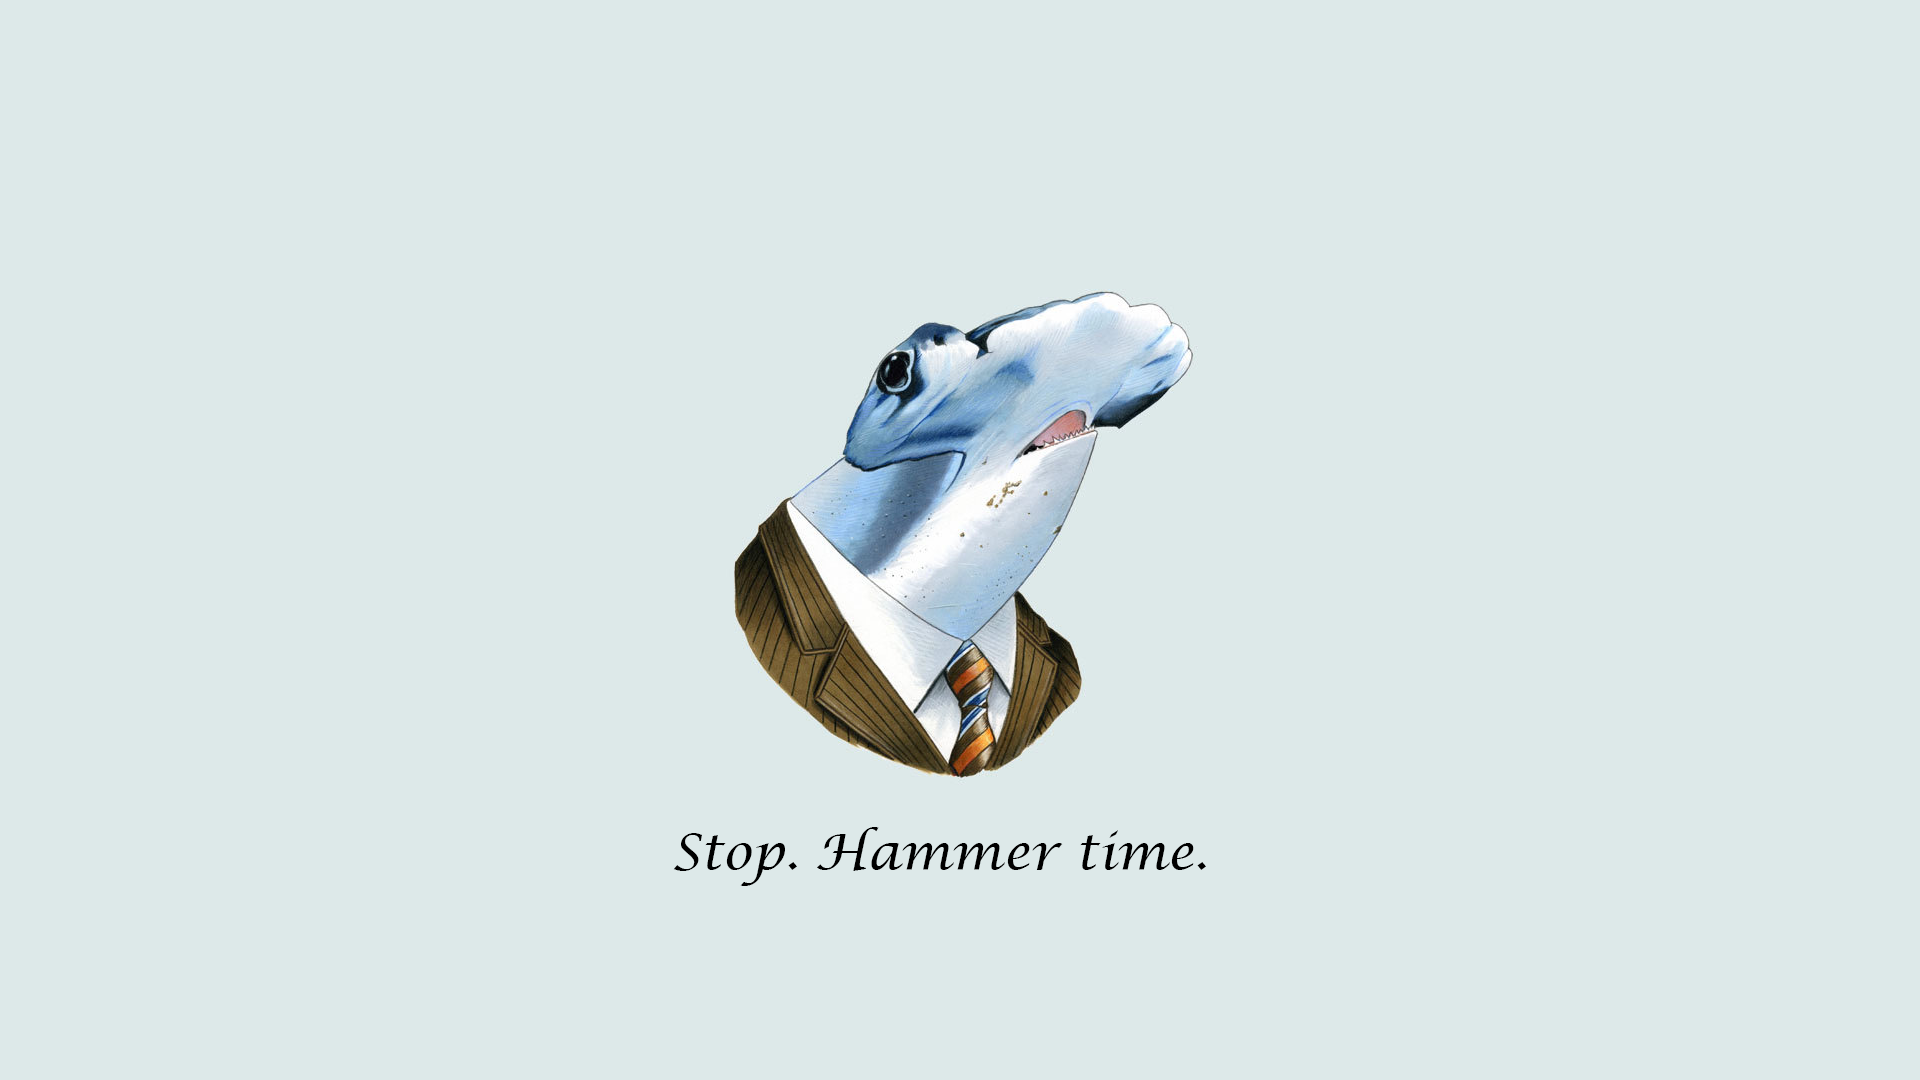 General 1920x1080 shark minimalism text humor puns fish animals simple background typography